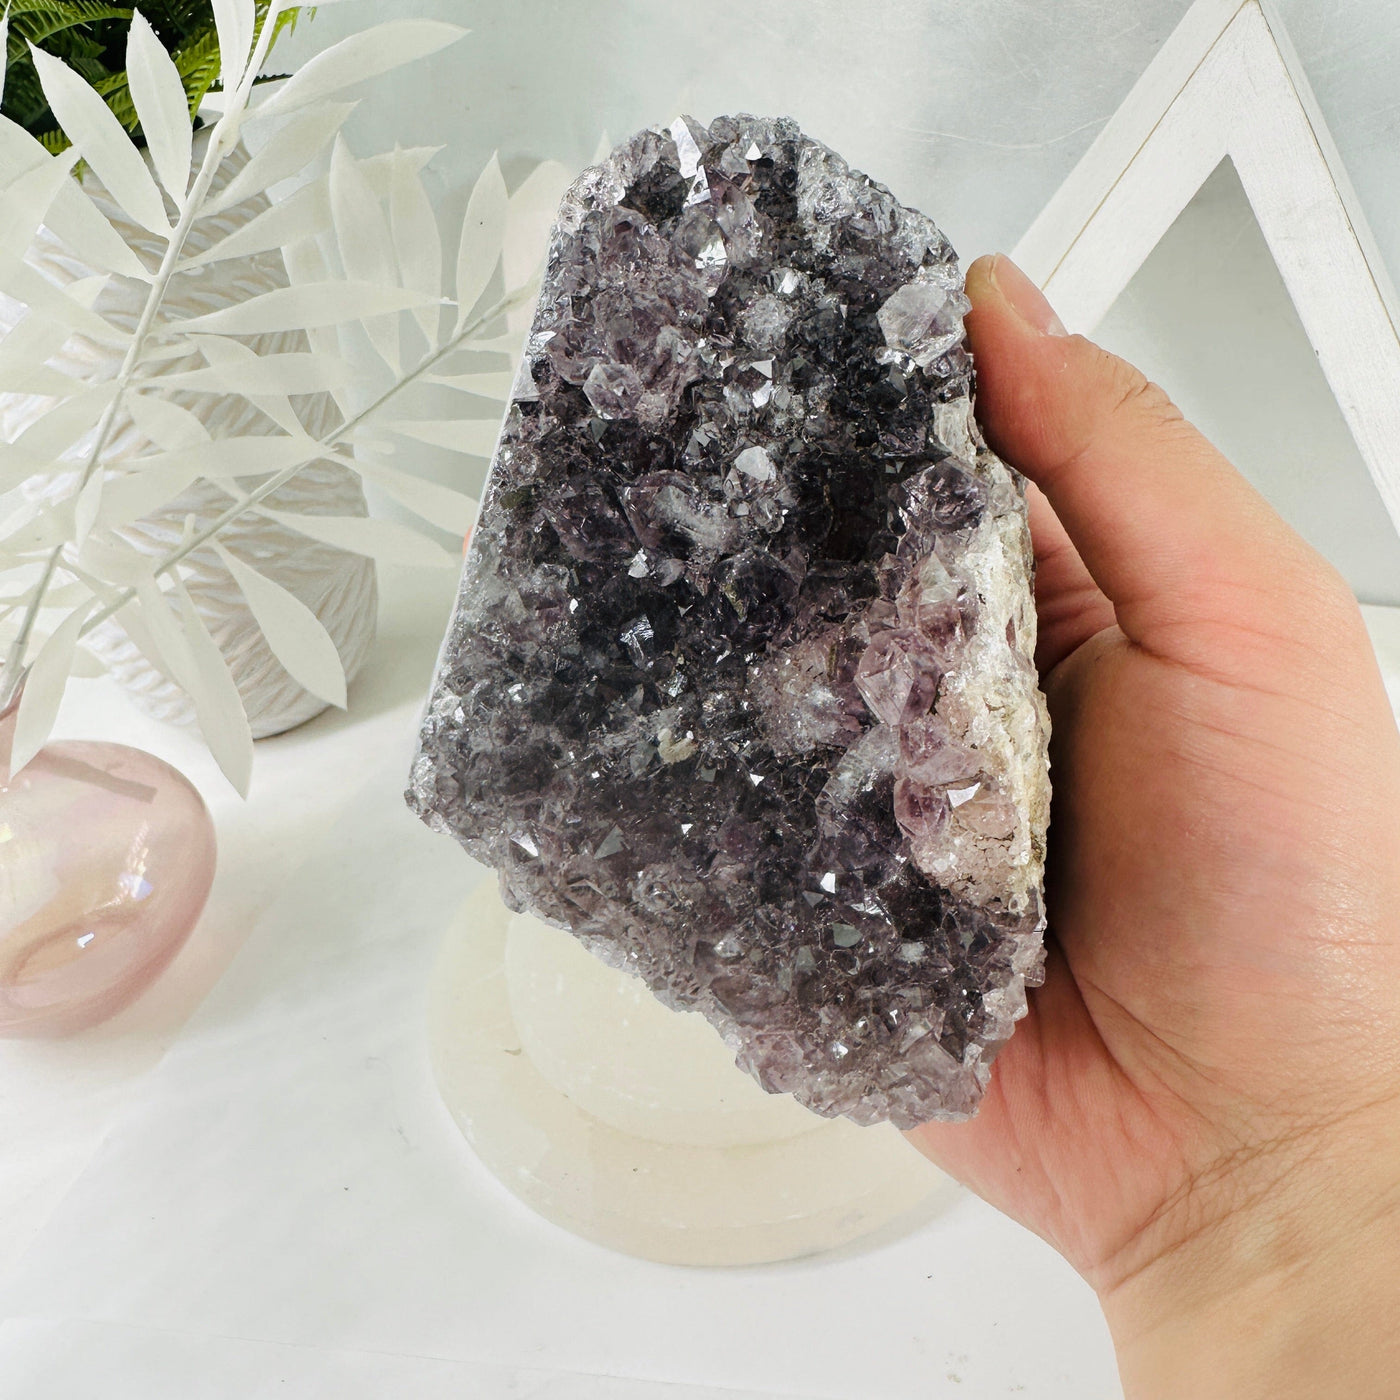 Amethyst Crystal Cluster - raw amethyst in hand for size reference